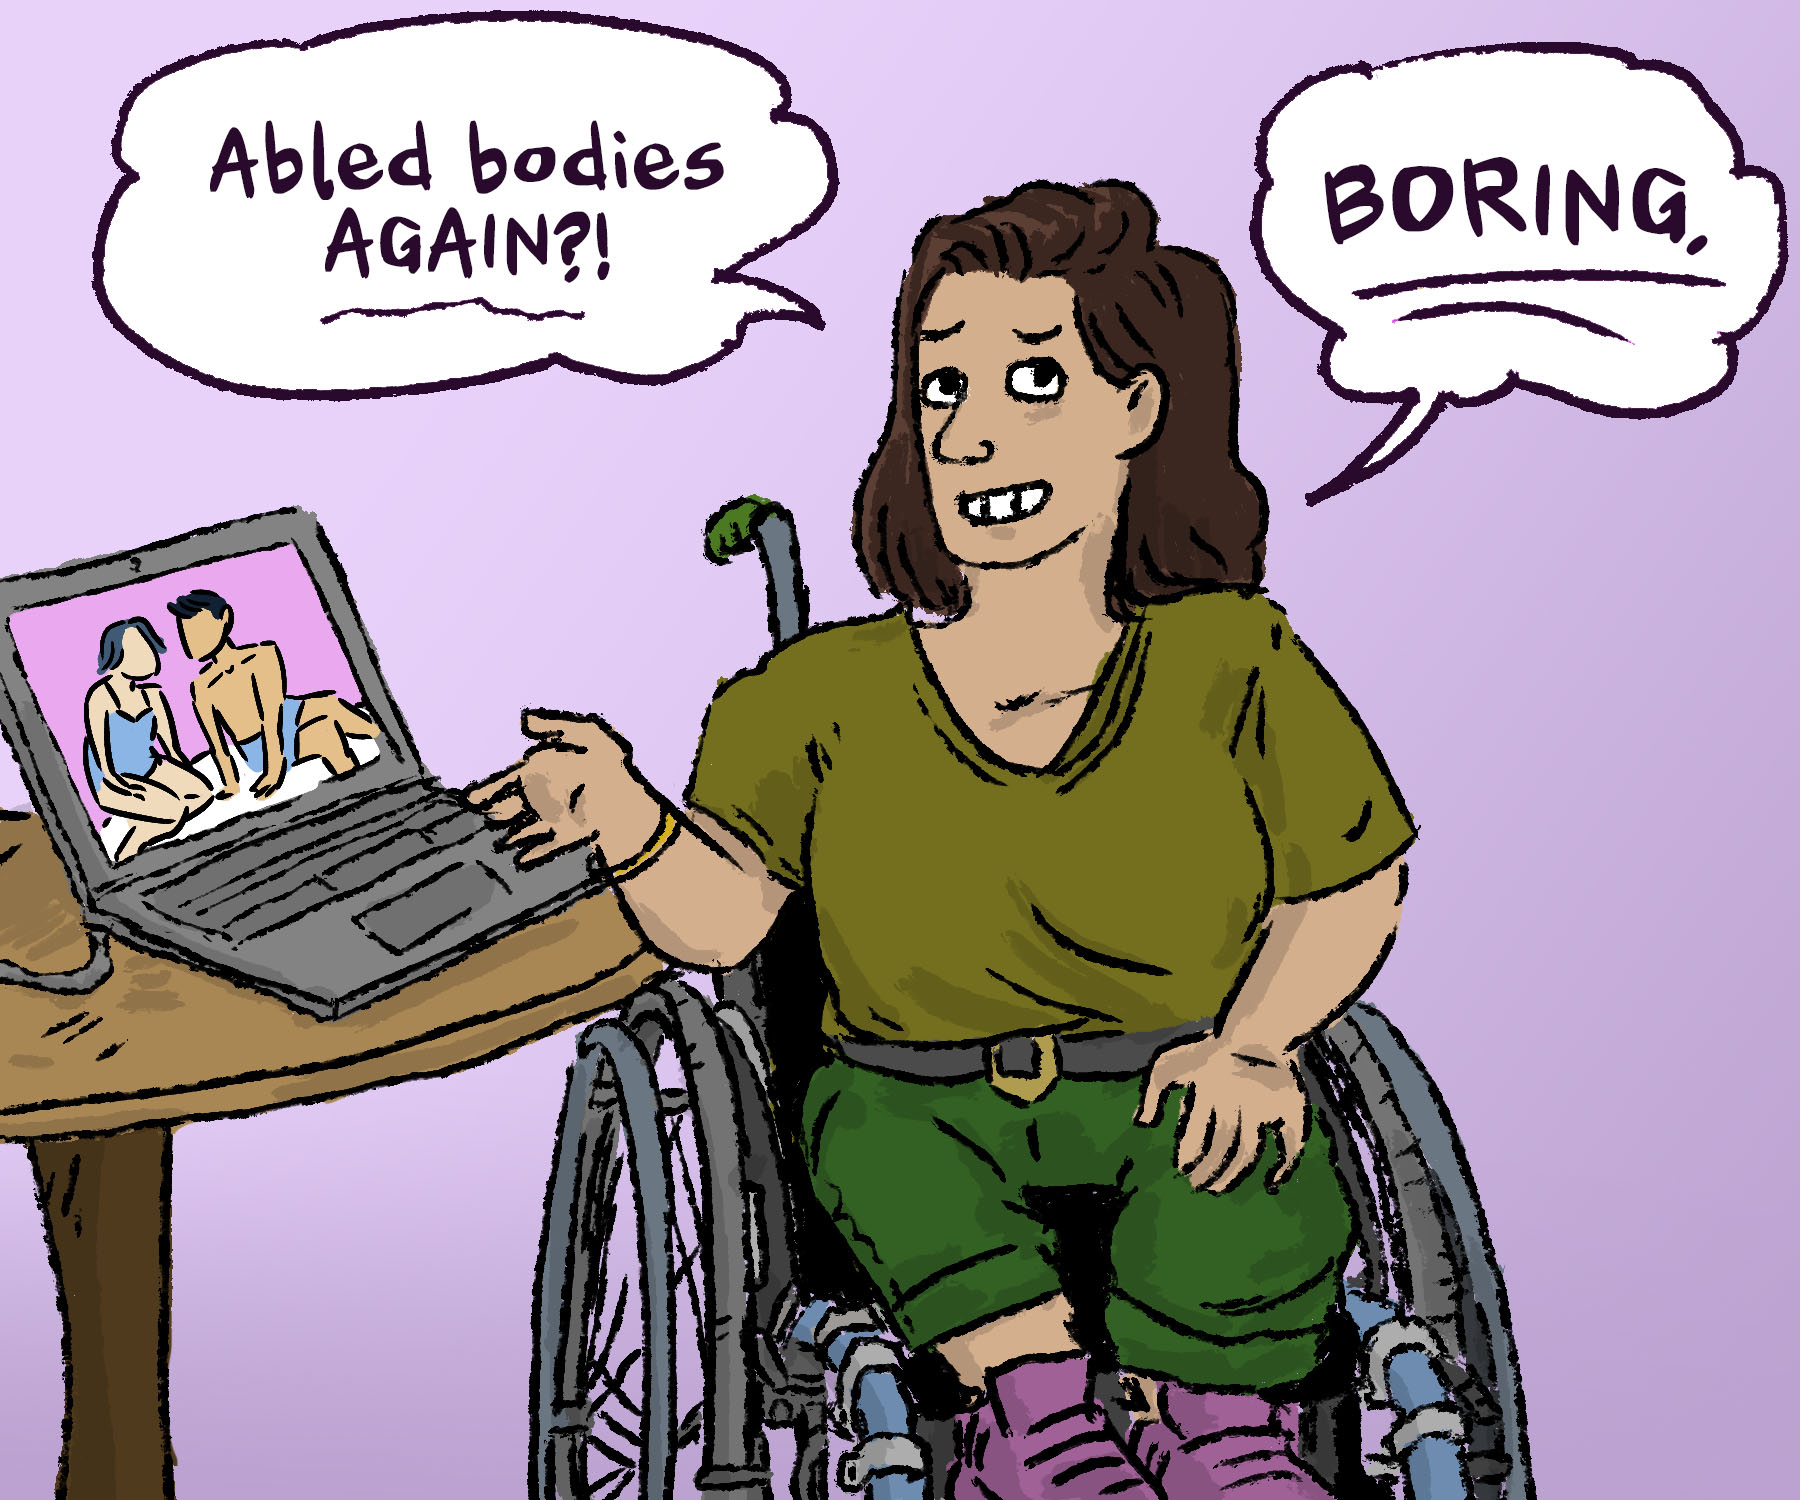 Image of someone in a wheelchair looking at porn and saying, "Abled bodies again? Boring."